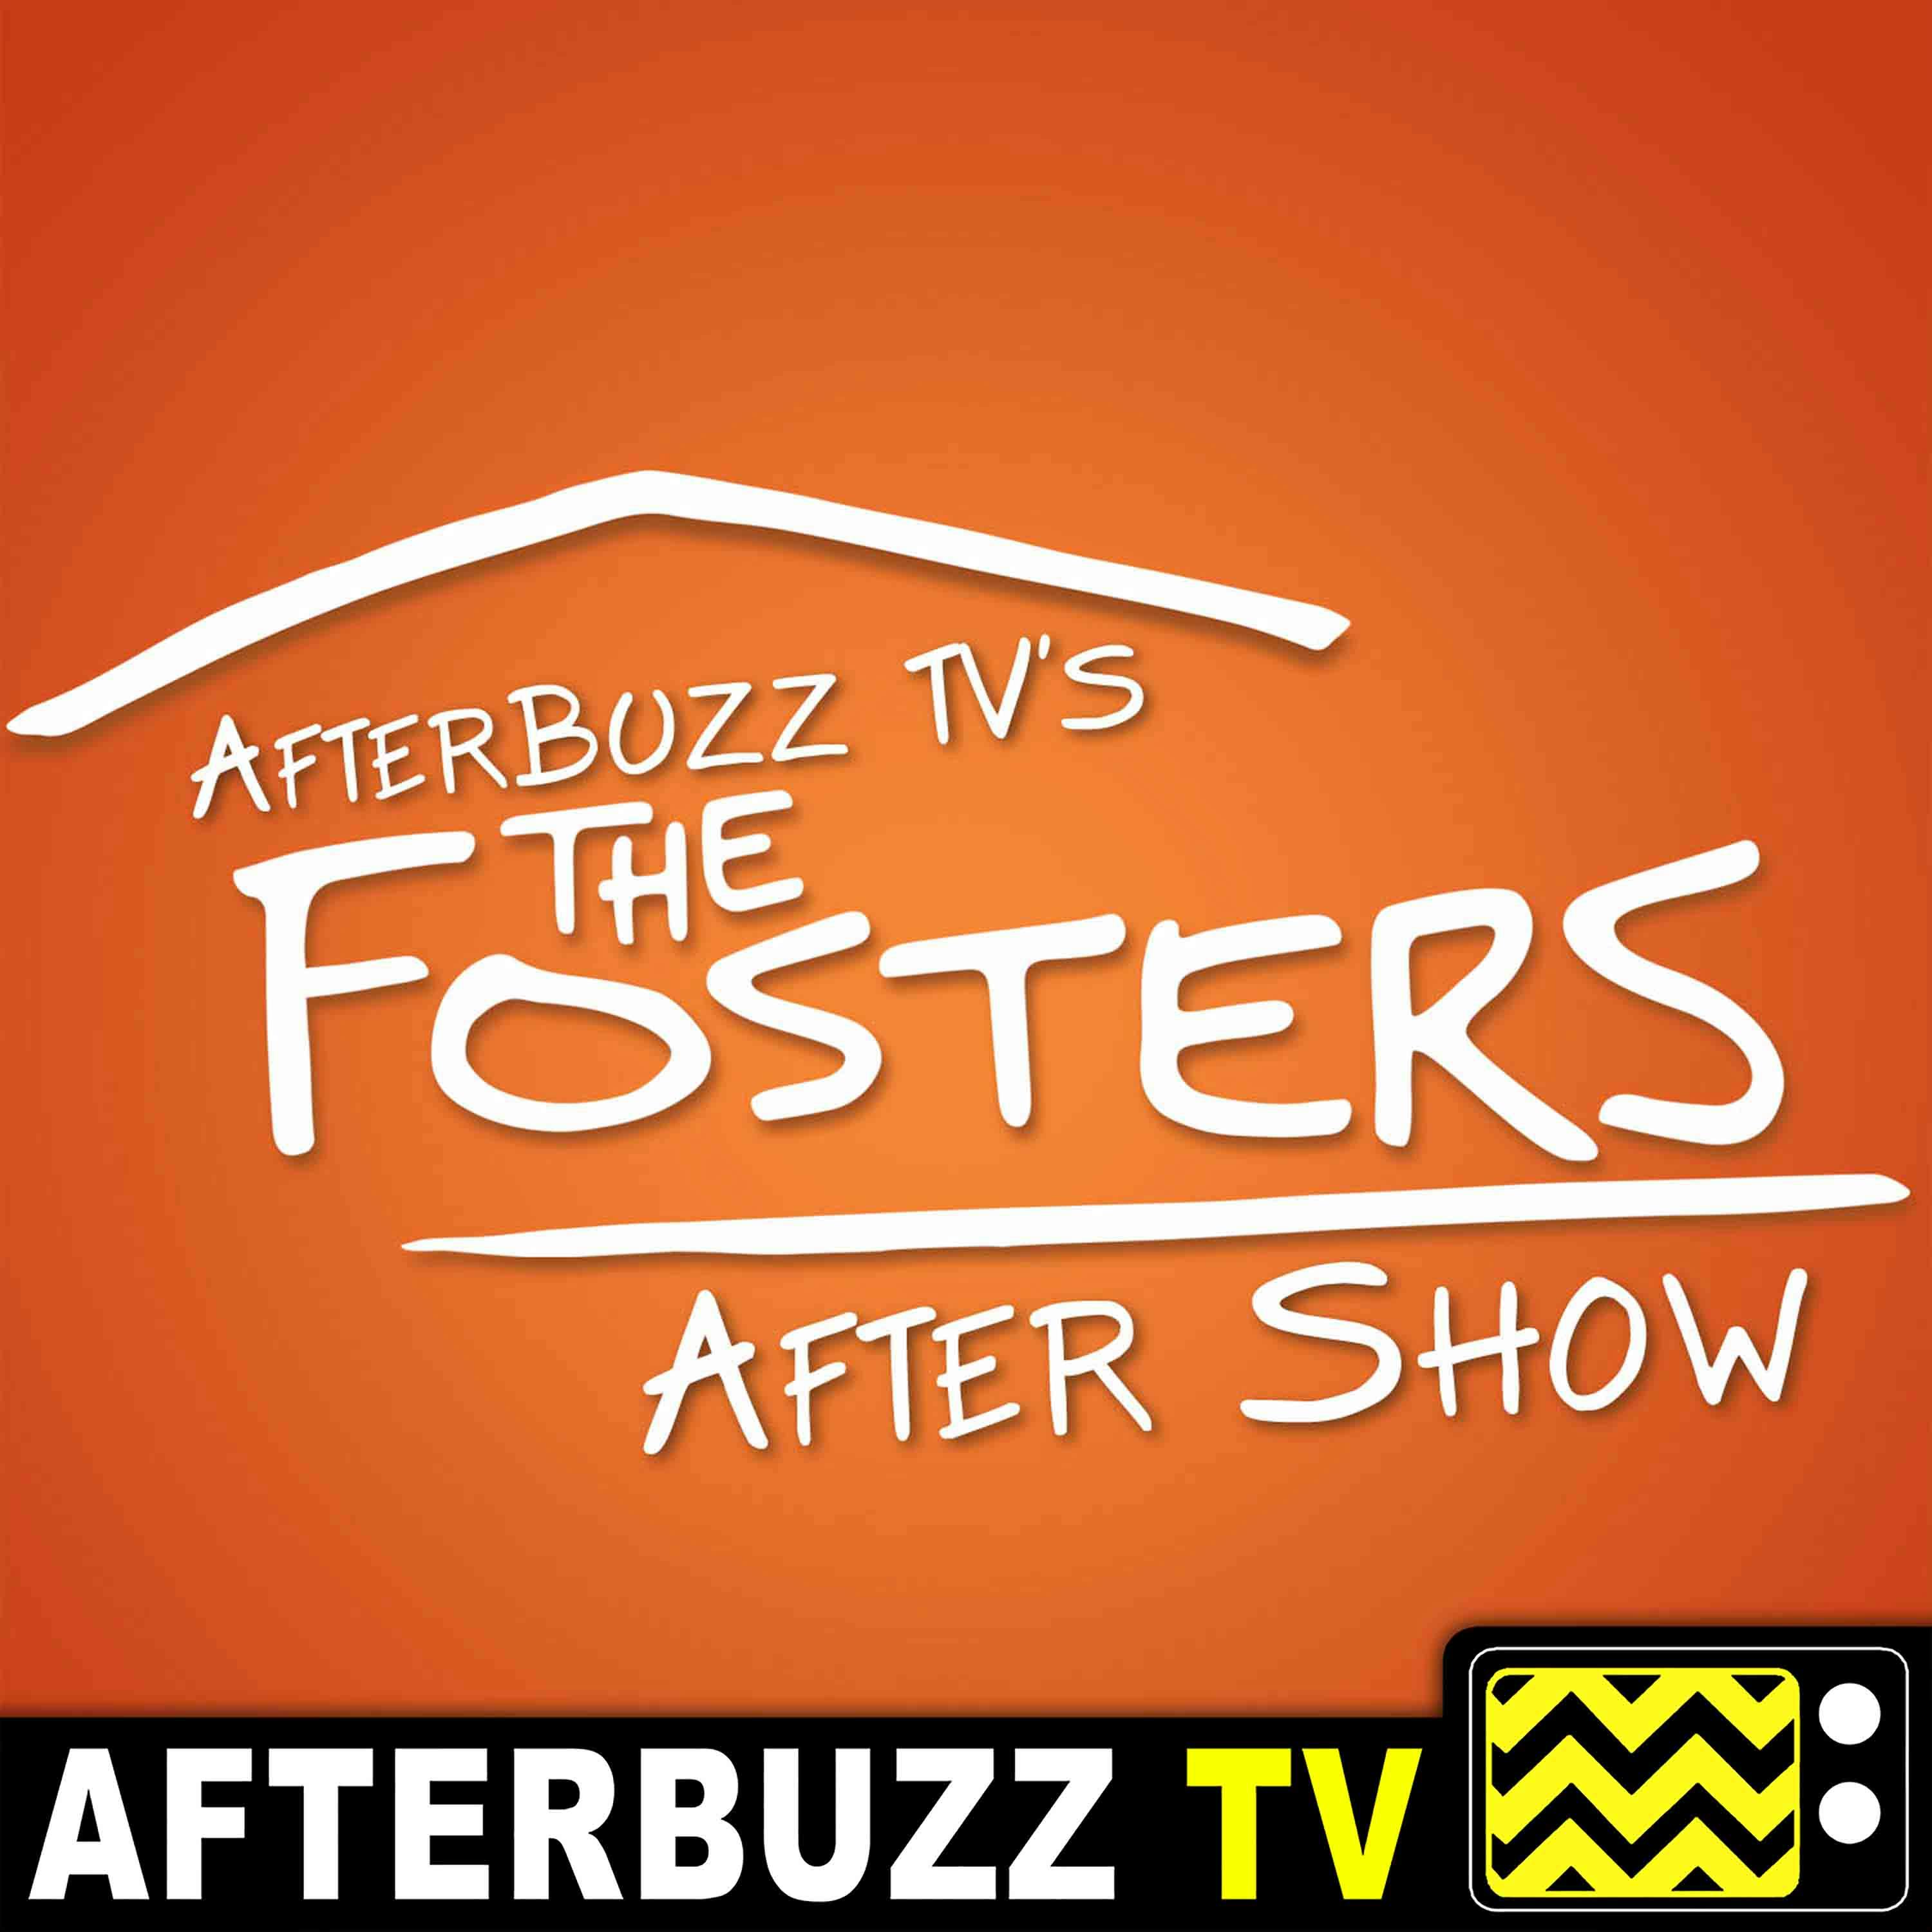 The Fosters S:5 | Chasing Waterfalls E:7 | AfterBuzz TV AfterShow